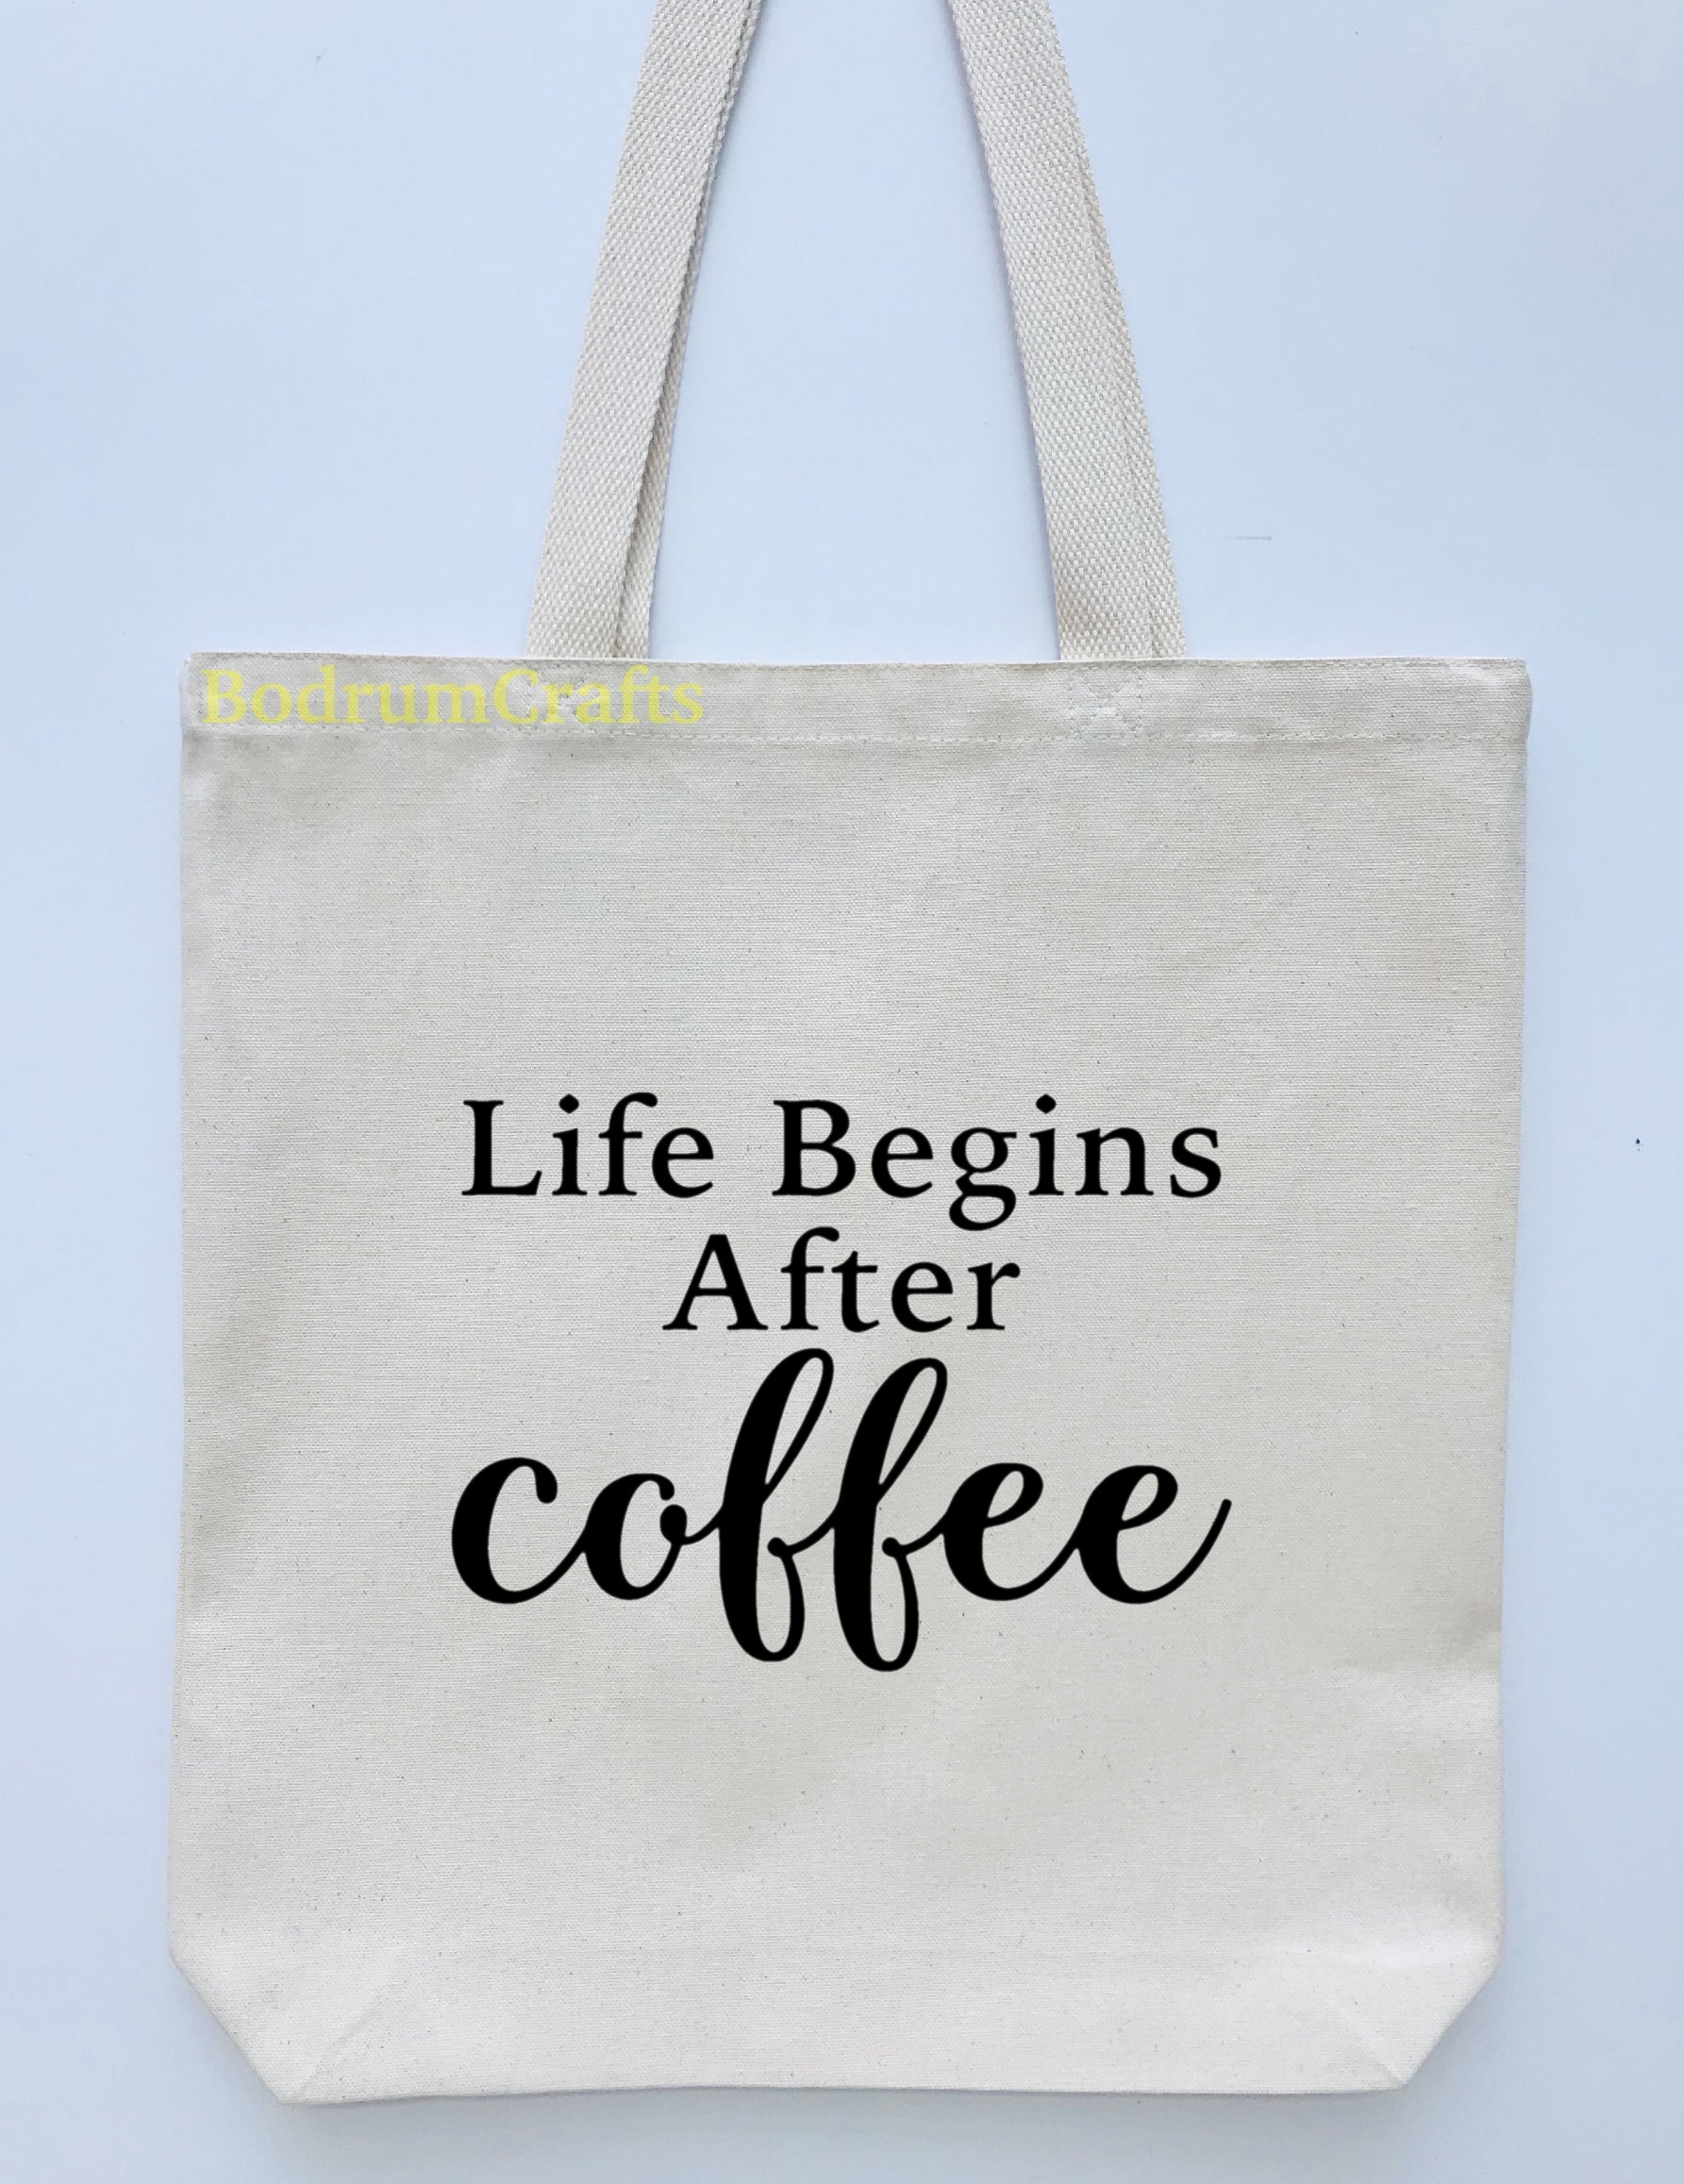 Coffee Design Printed Canvas Tote Bag, "Life Begins After Coffee"